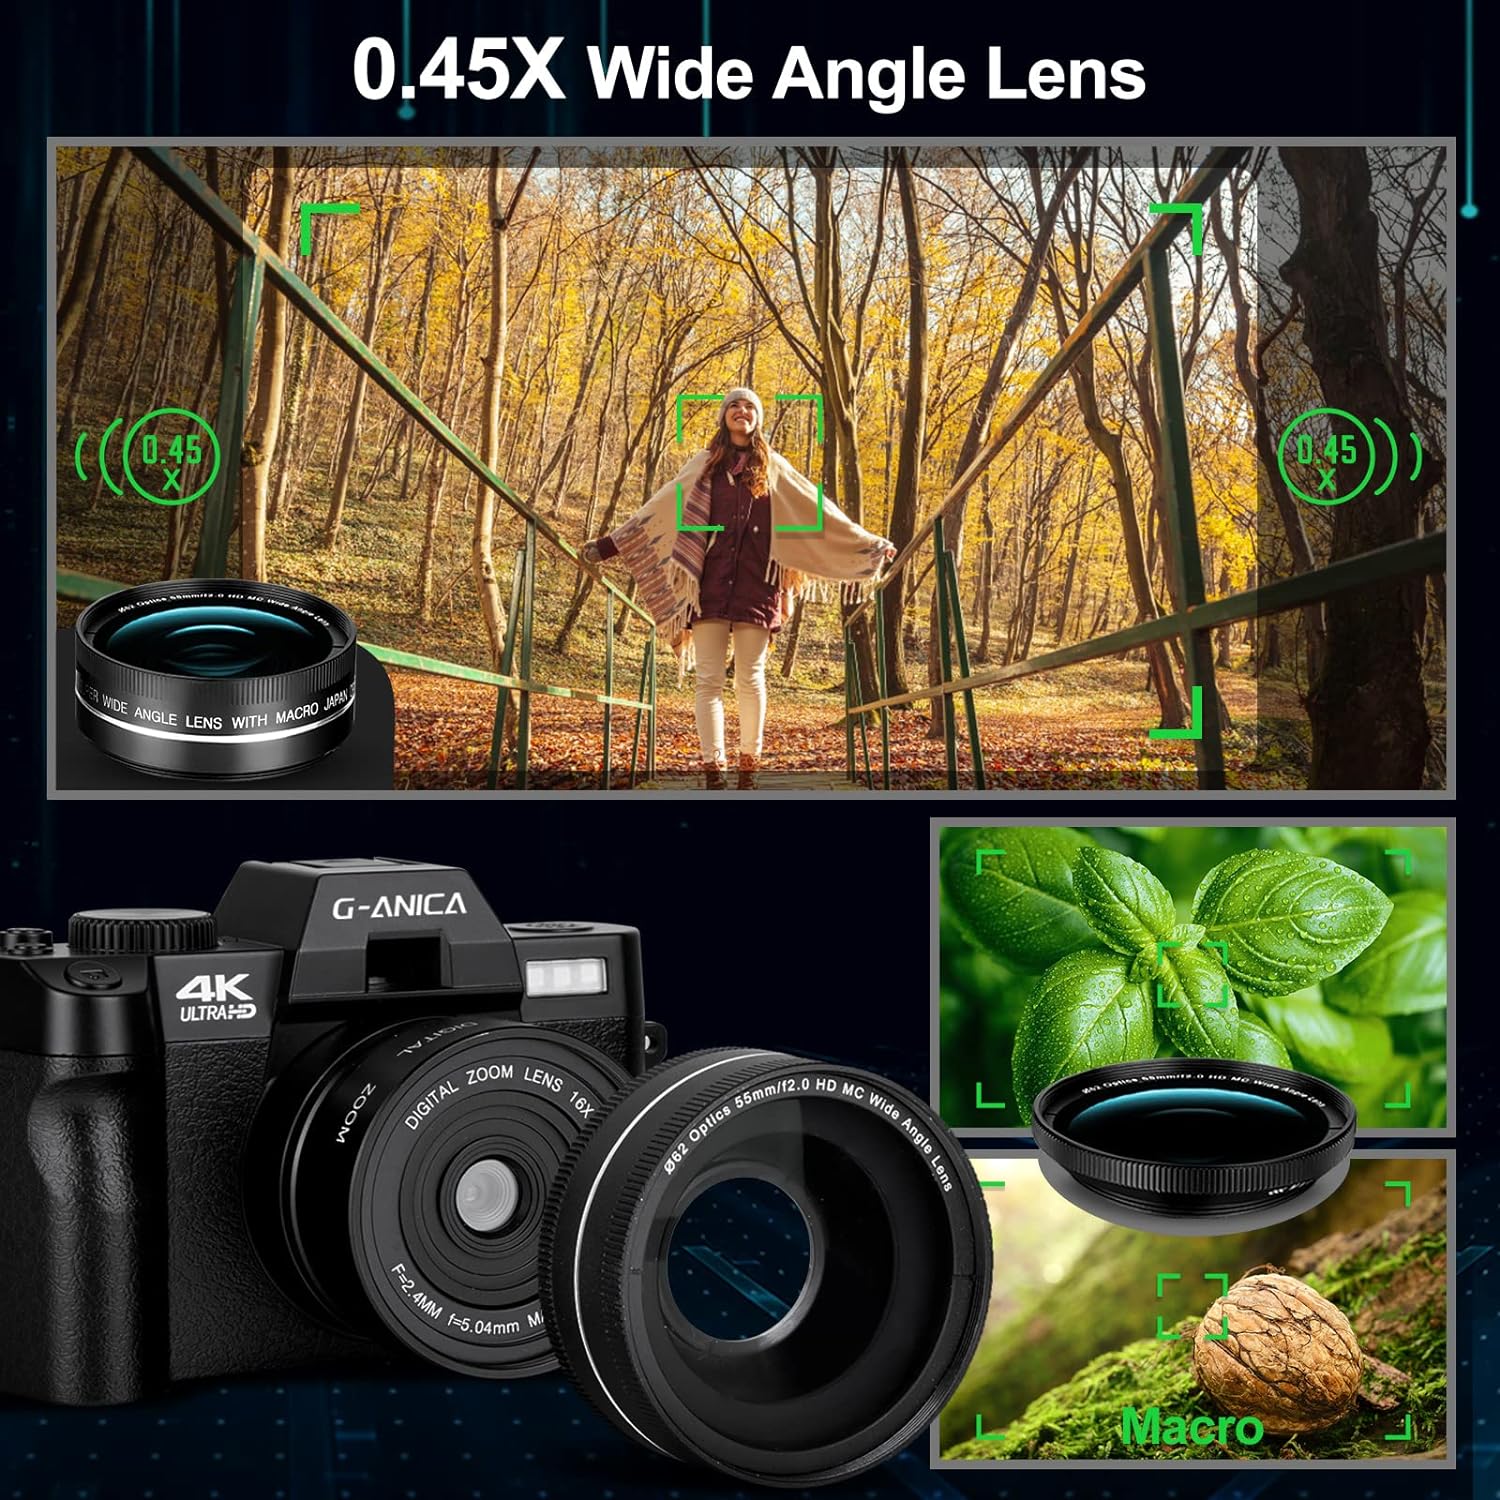 G-Anica Digital Cameras for Photography, 48MP&4K Video/Vlogging Camera for YouTube with WiFi, 60FPS Autofocus Travel Camera with Wide-Angle & Macro Lens (2 Batteries)